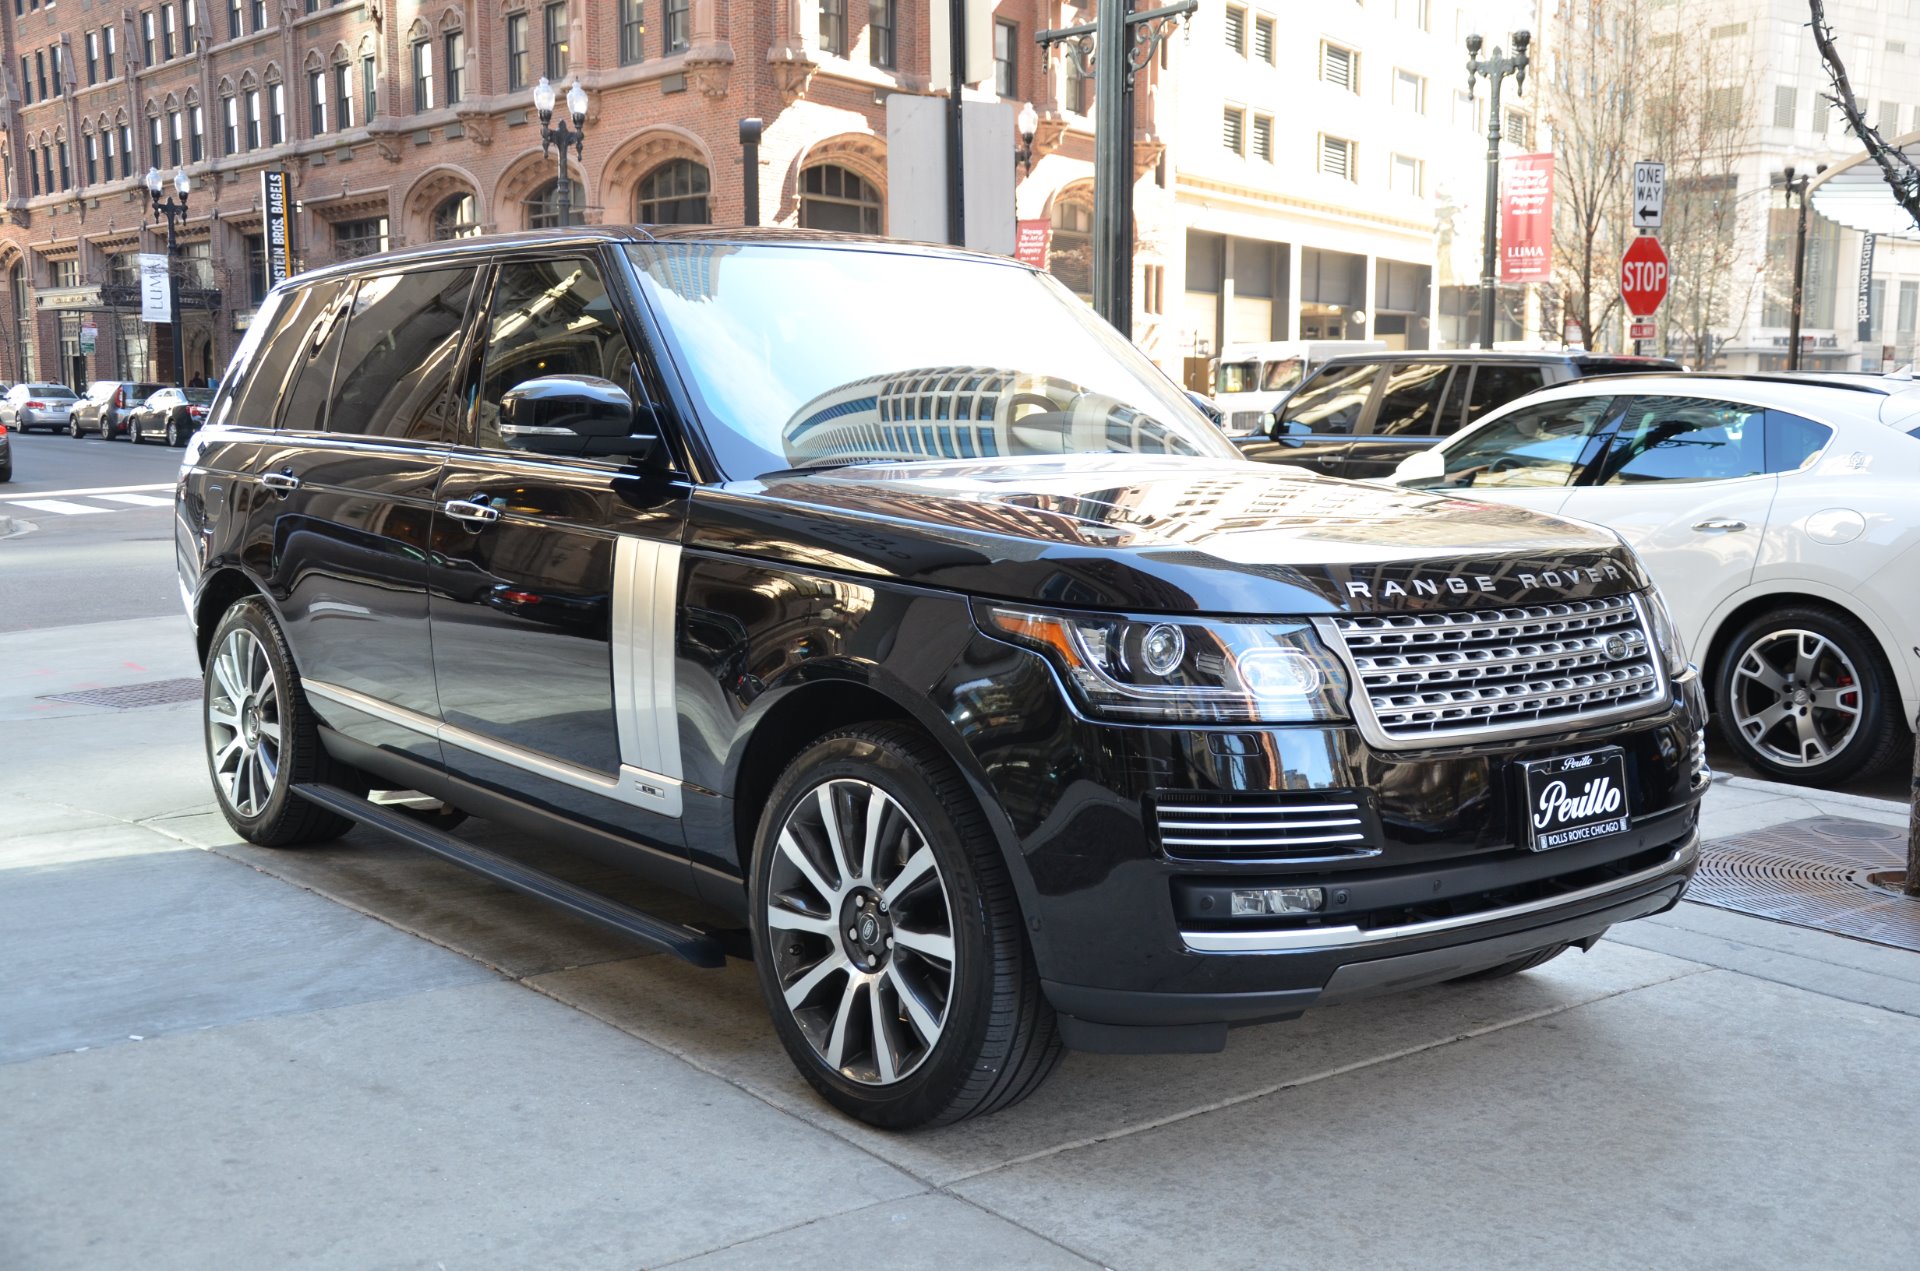 2014 Land Rover Range Rover Autobiography LWB Stock # B887A for sale ...